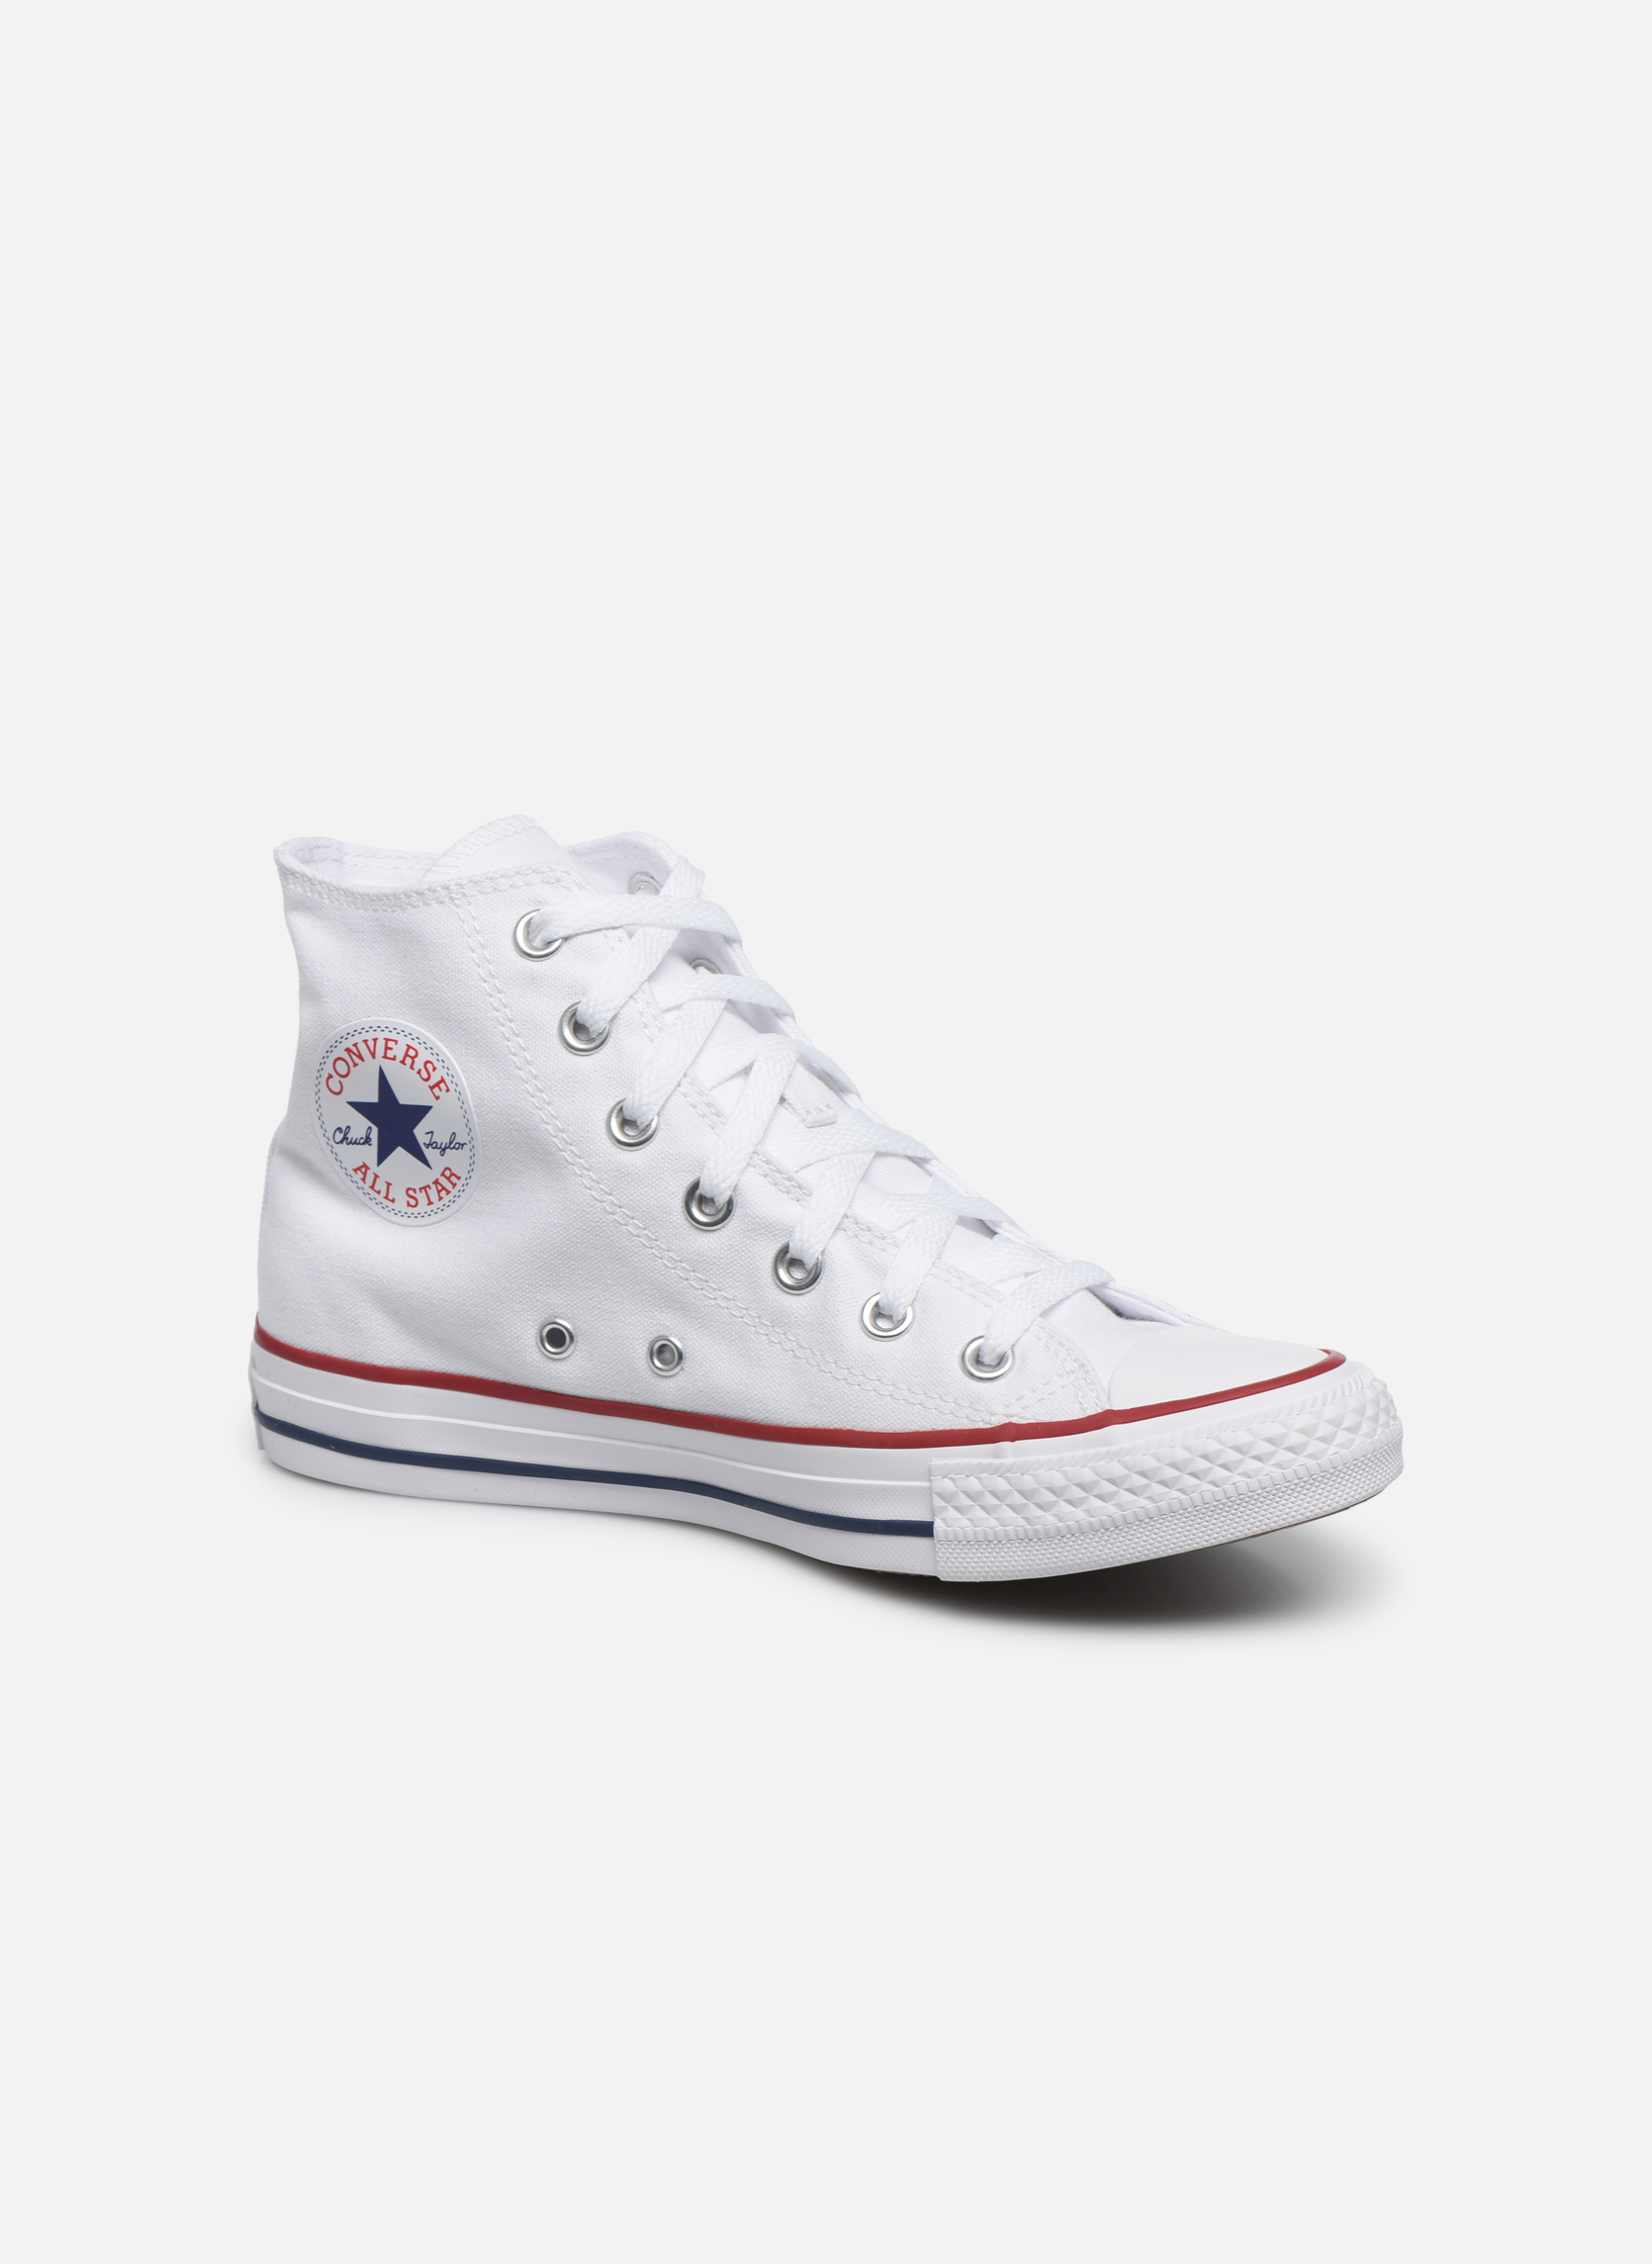 Converse Chuck Taylor All Star Dainty Ox Craft SL Trainers in White at ...